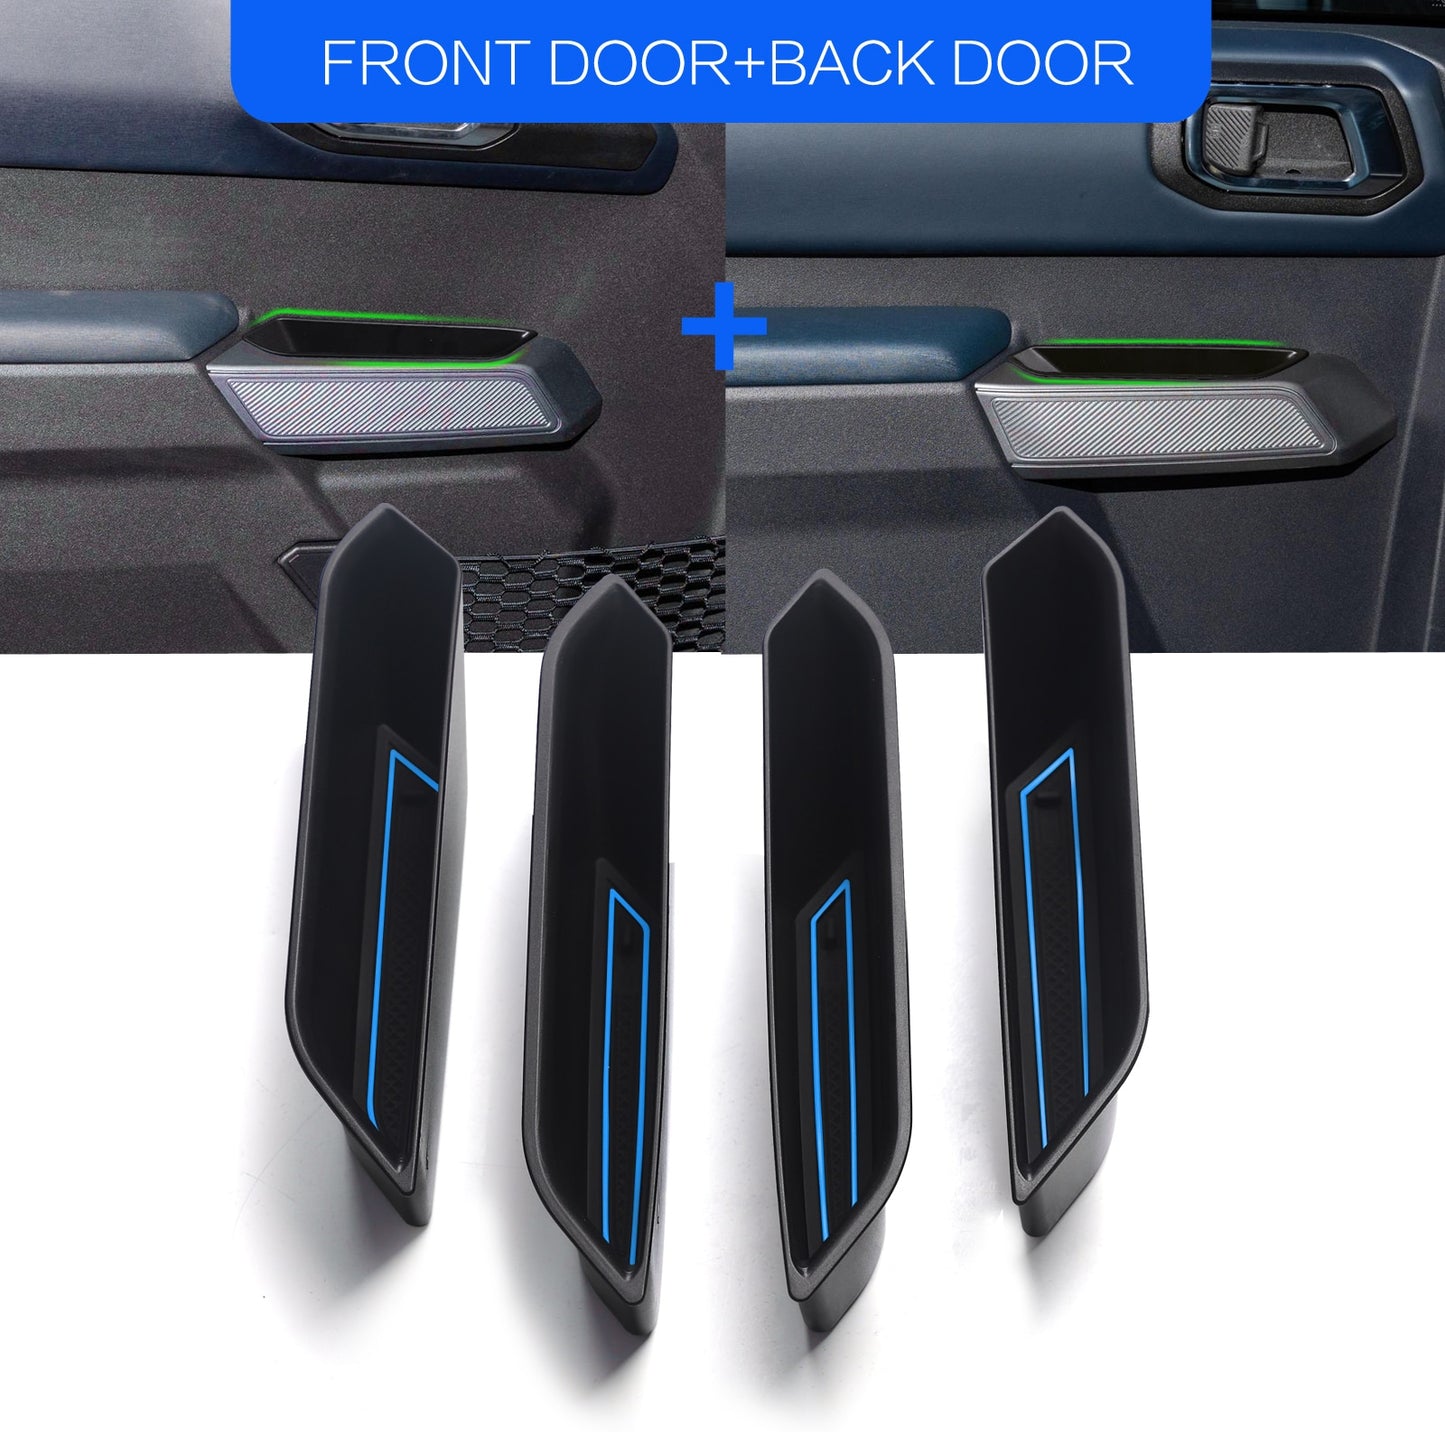 Front Rear Door Handle Storage Box for Ford Bronco 2021 2022 (4 Door) Accessories Car Side Armrest Organizer Container Tray 4pcs